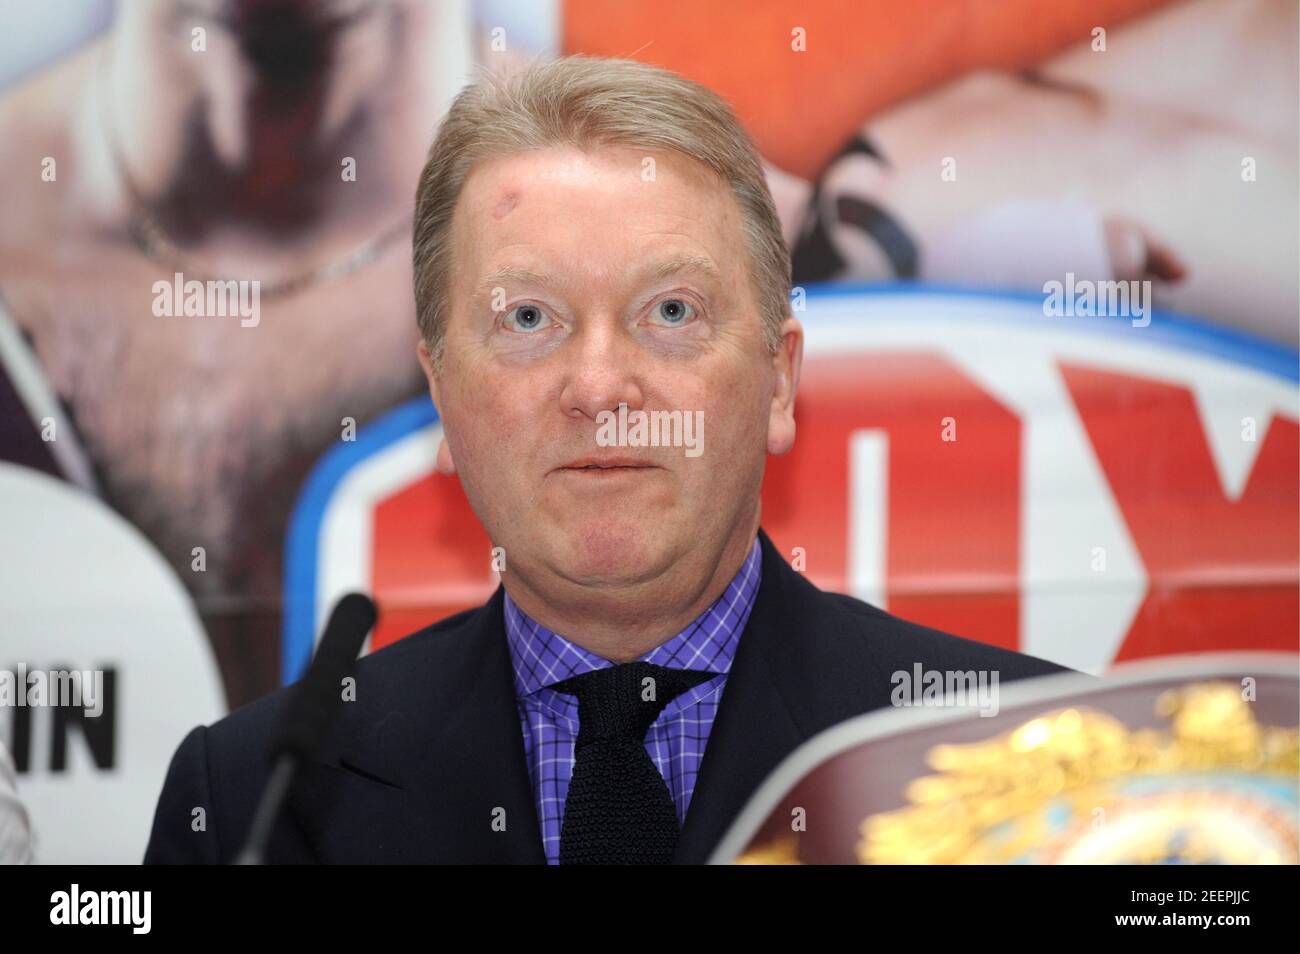 Boxing - Ricky Burns, Nathan Cleverly, George Groves & Dereck Chisora Press Conference  - Landmark Hotel, London - 14/1/13  Promoter Frank Warren during the press conference  Mandatory Credit: Action Images / Henry Browne Stock Photo